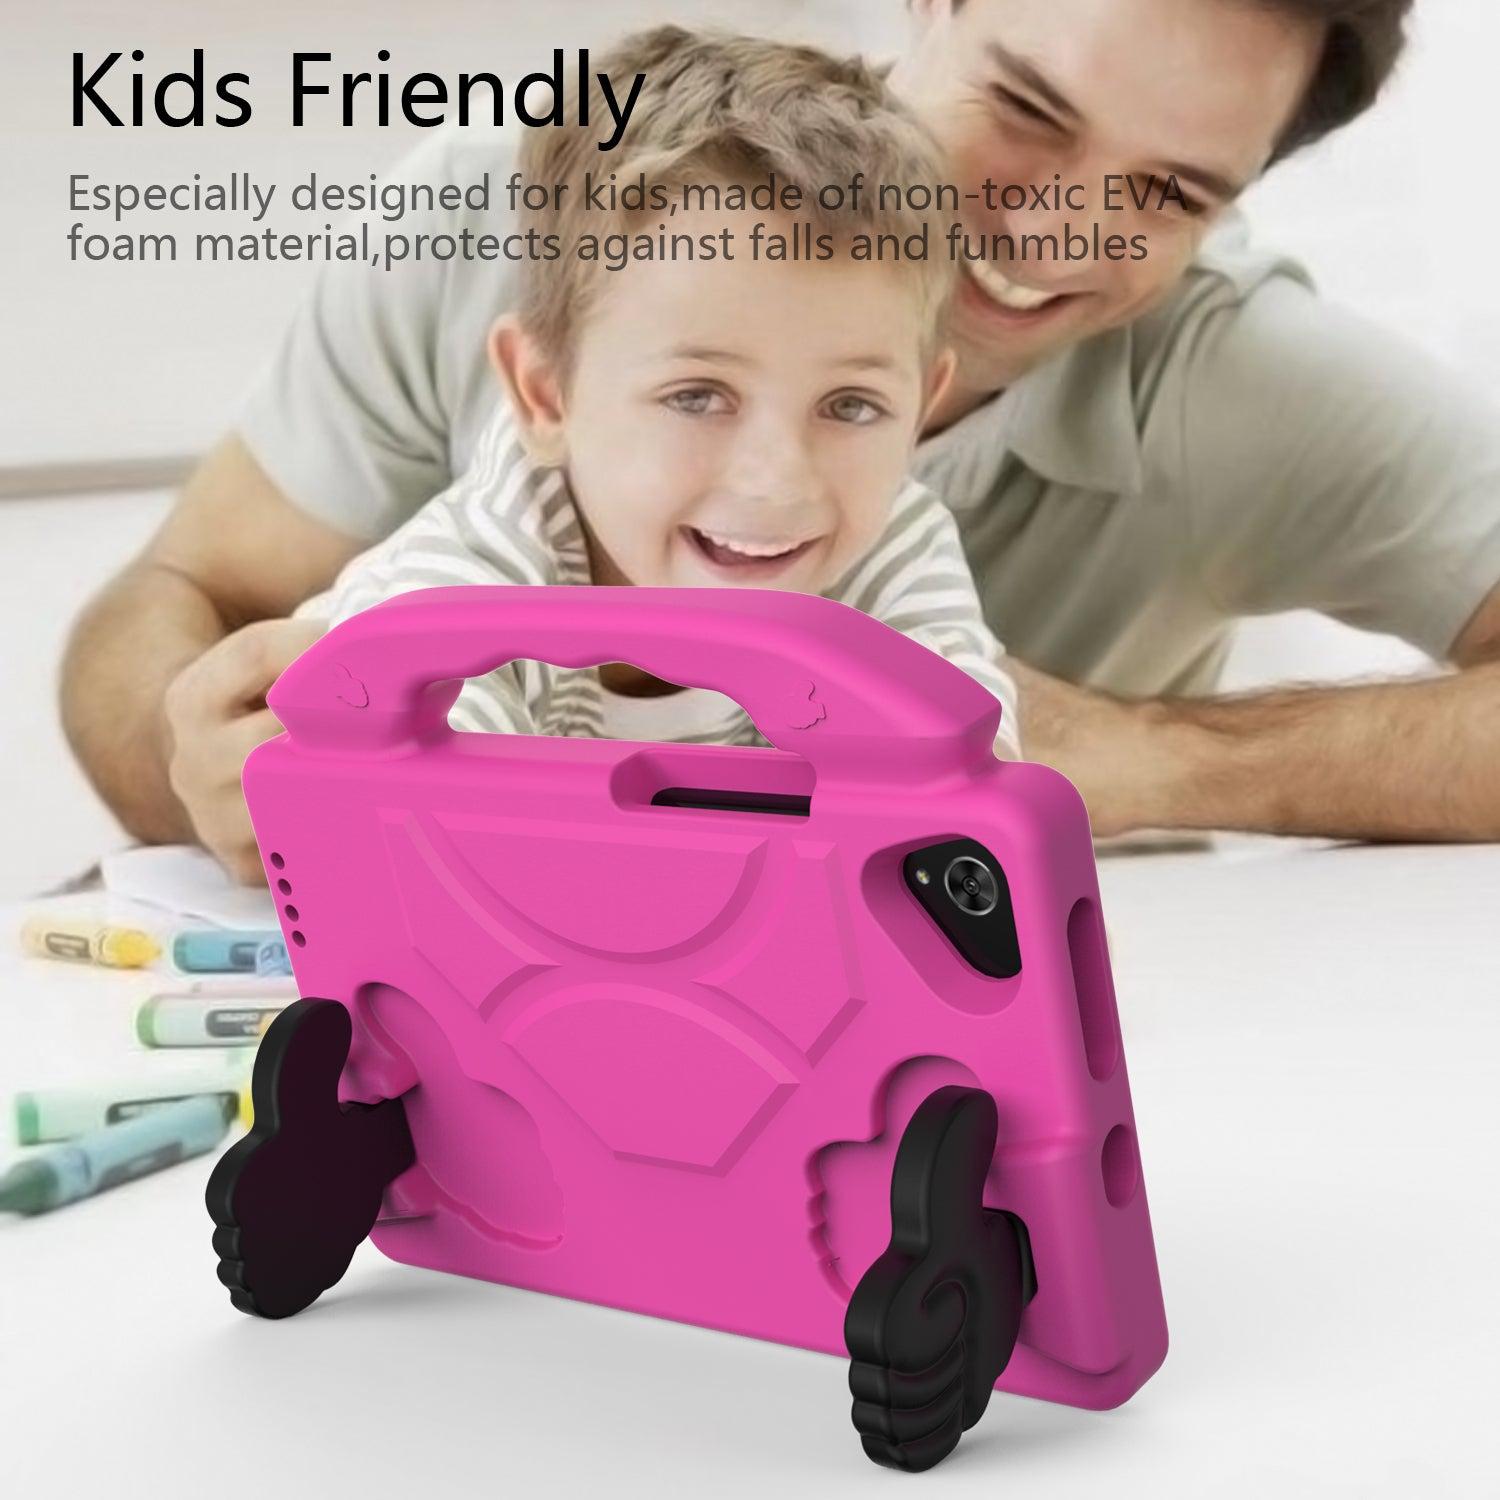 For Samsung Galaxy Tab A7 Lite Kids Friendly Case Shockproof Cover With Thumbs Up - Pink-www.firsthelptech.ie